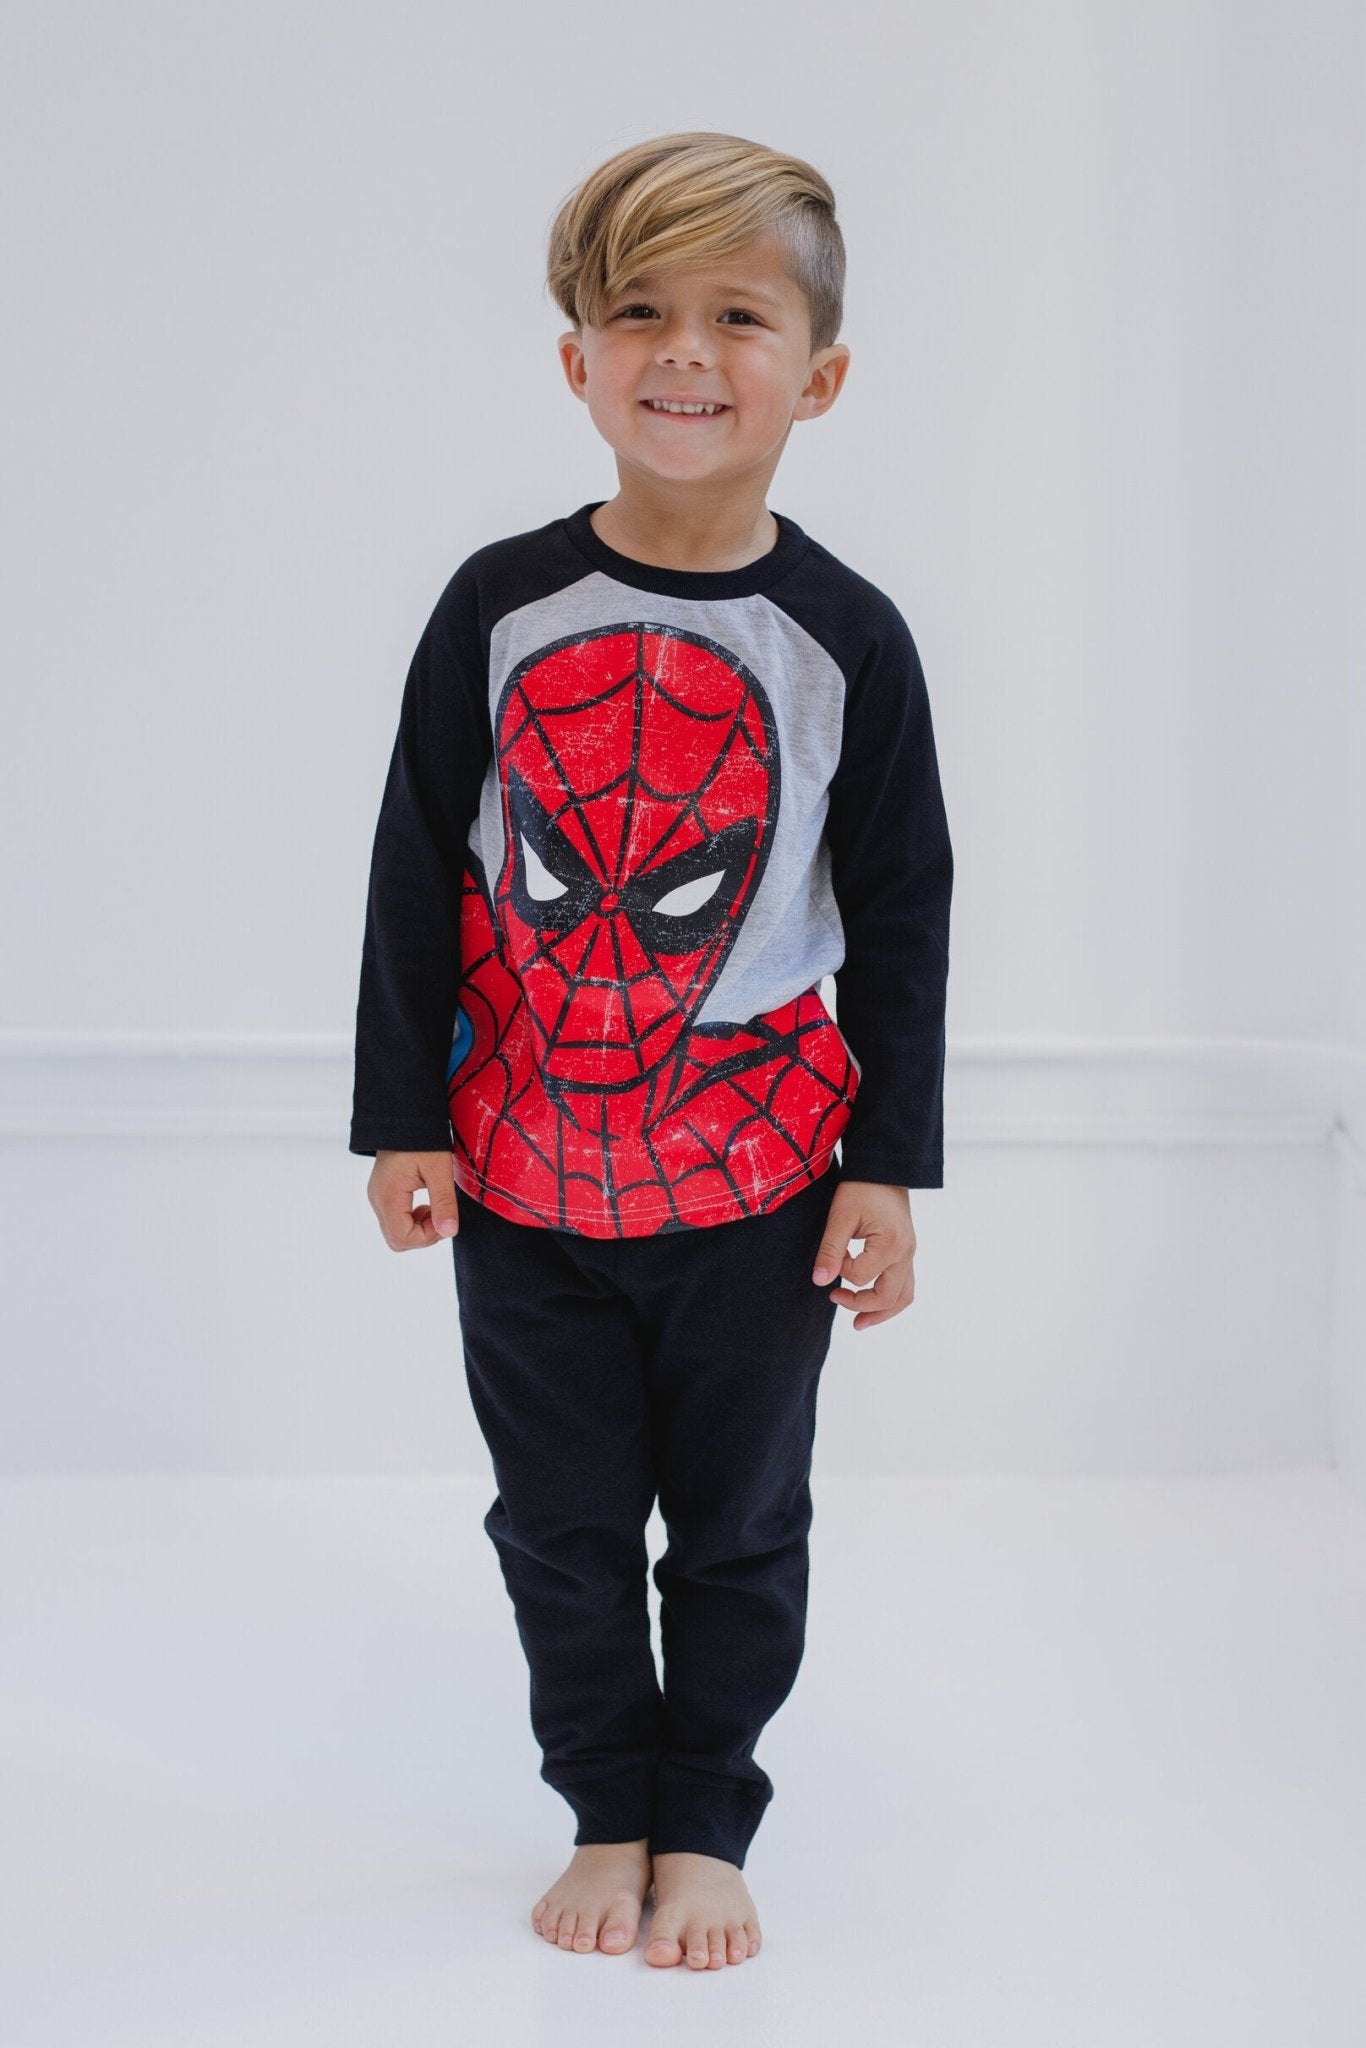 Marvel Avengers T - Shirt and French Terry Pants - imagikids